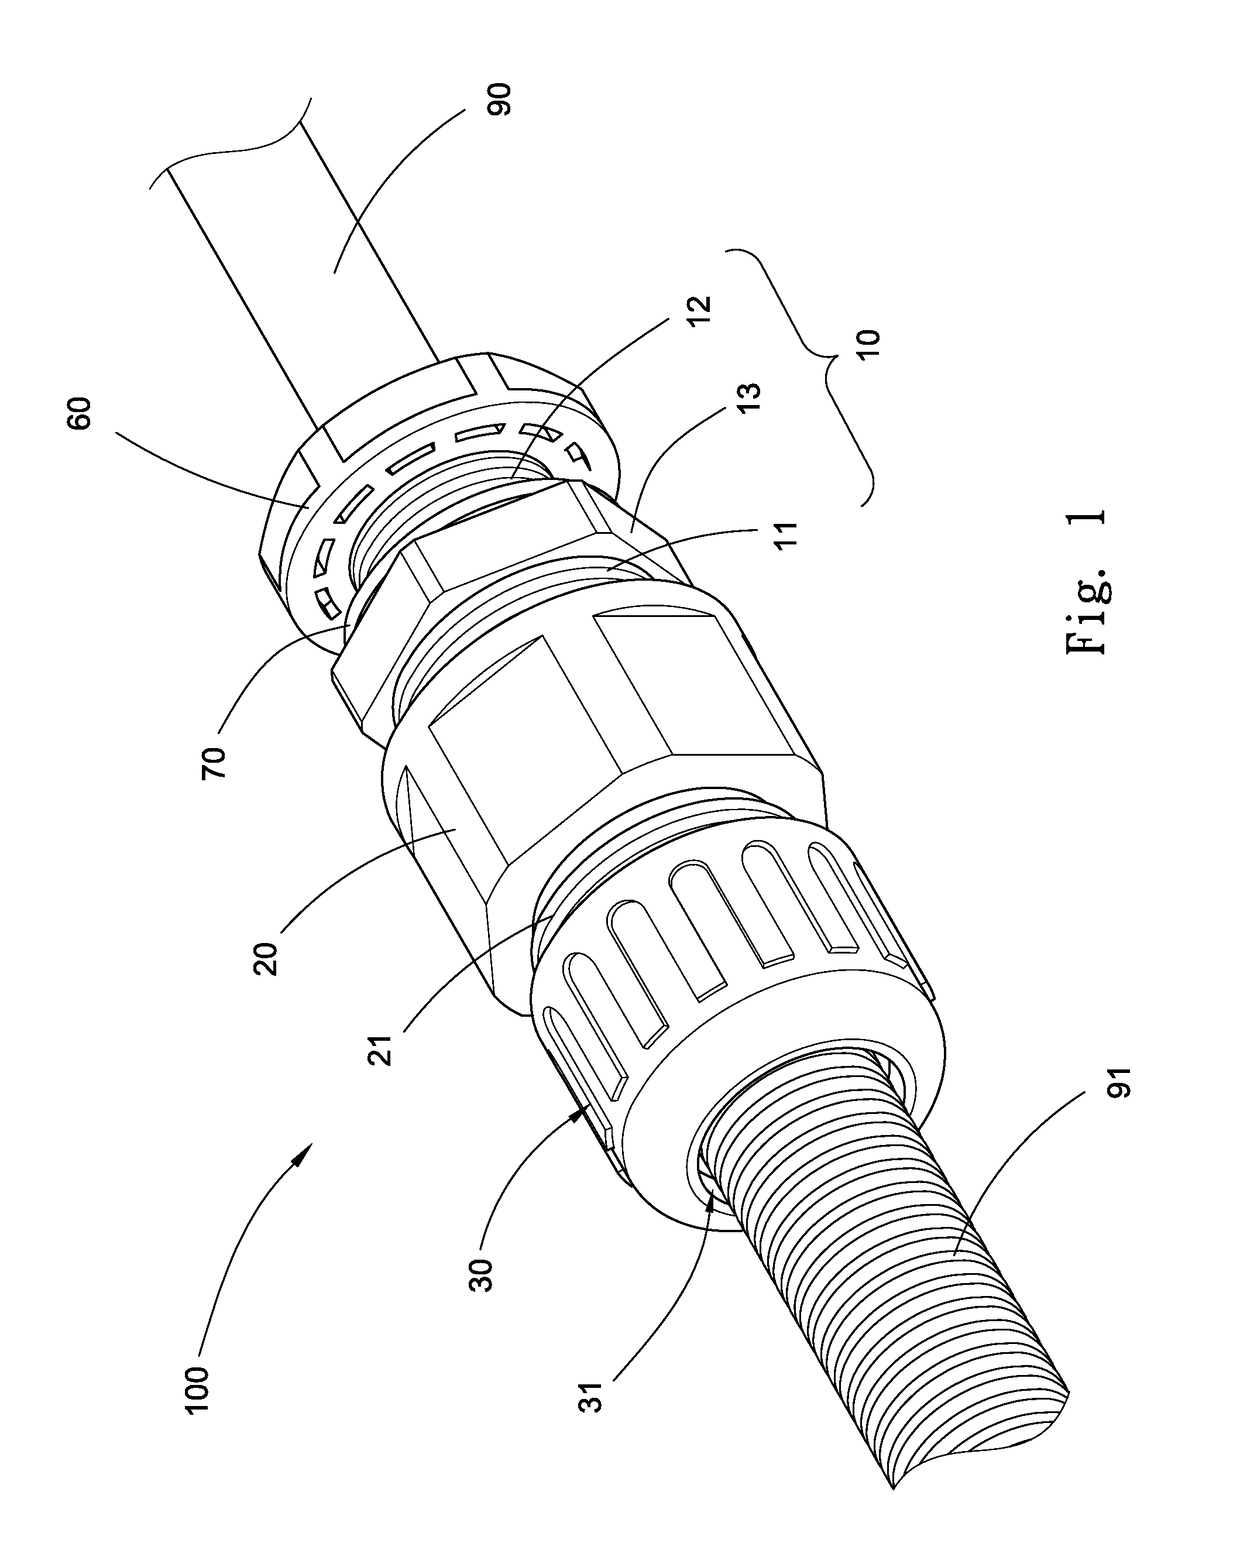 Cable and flexible conduit gland assembly